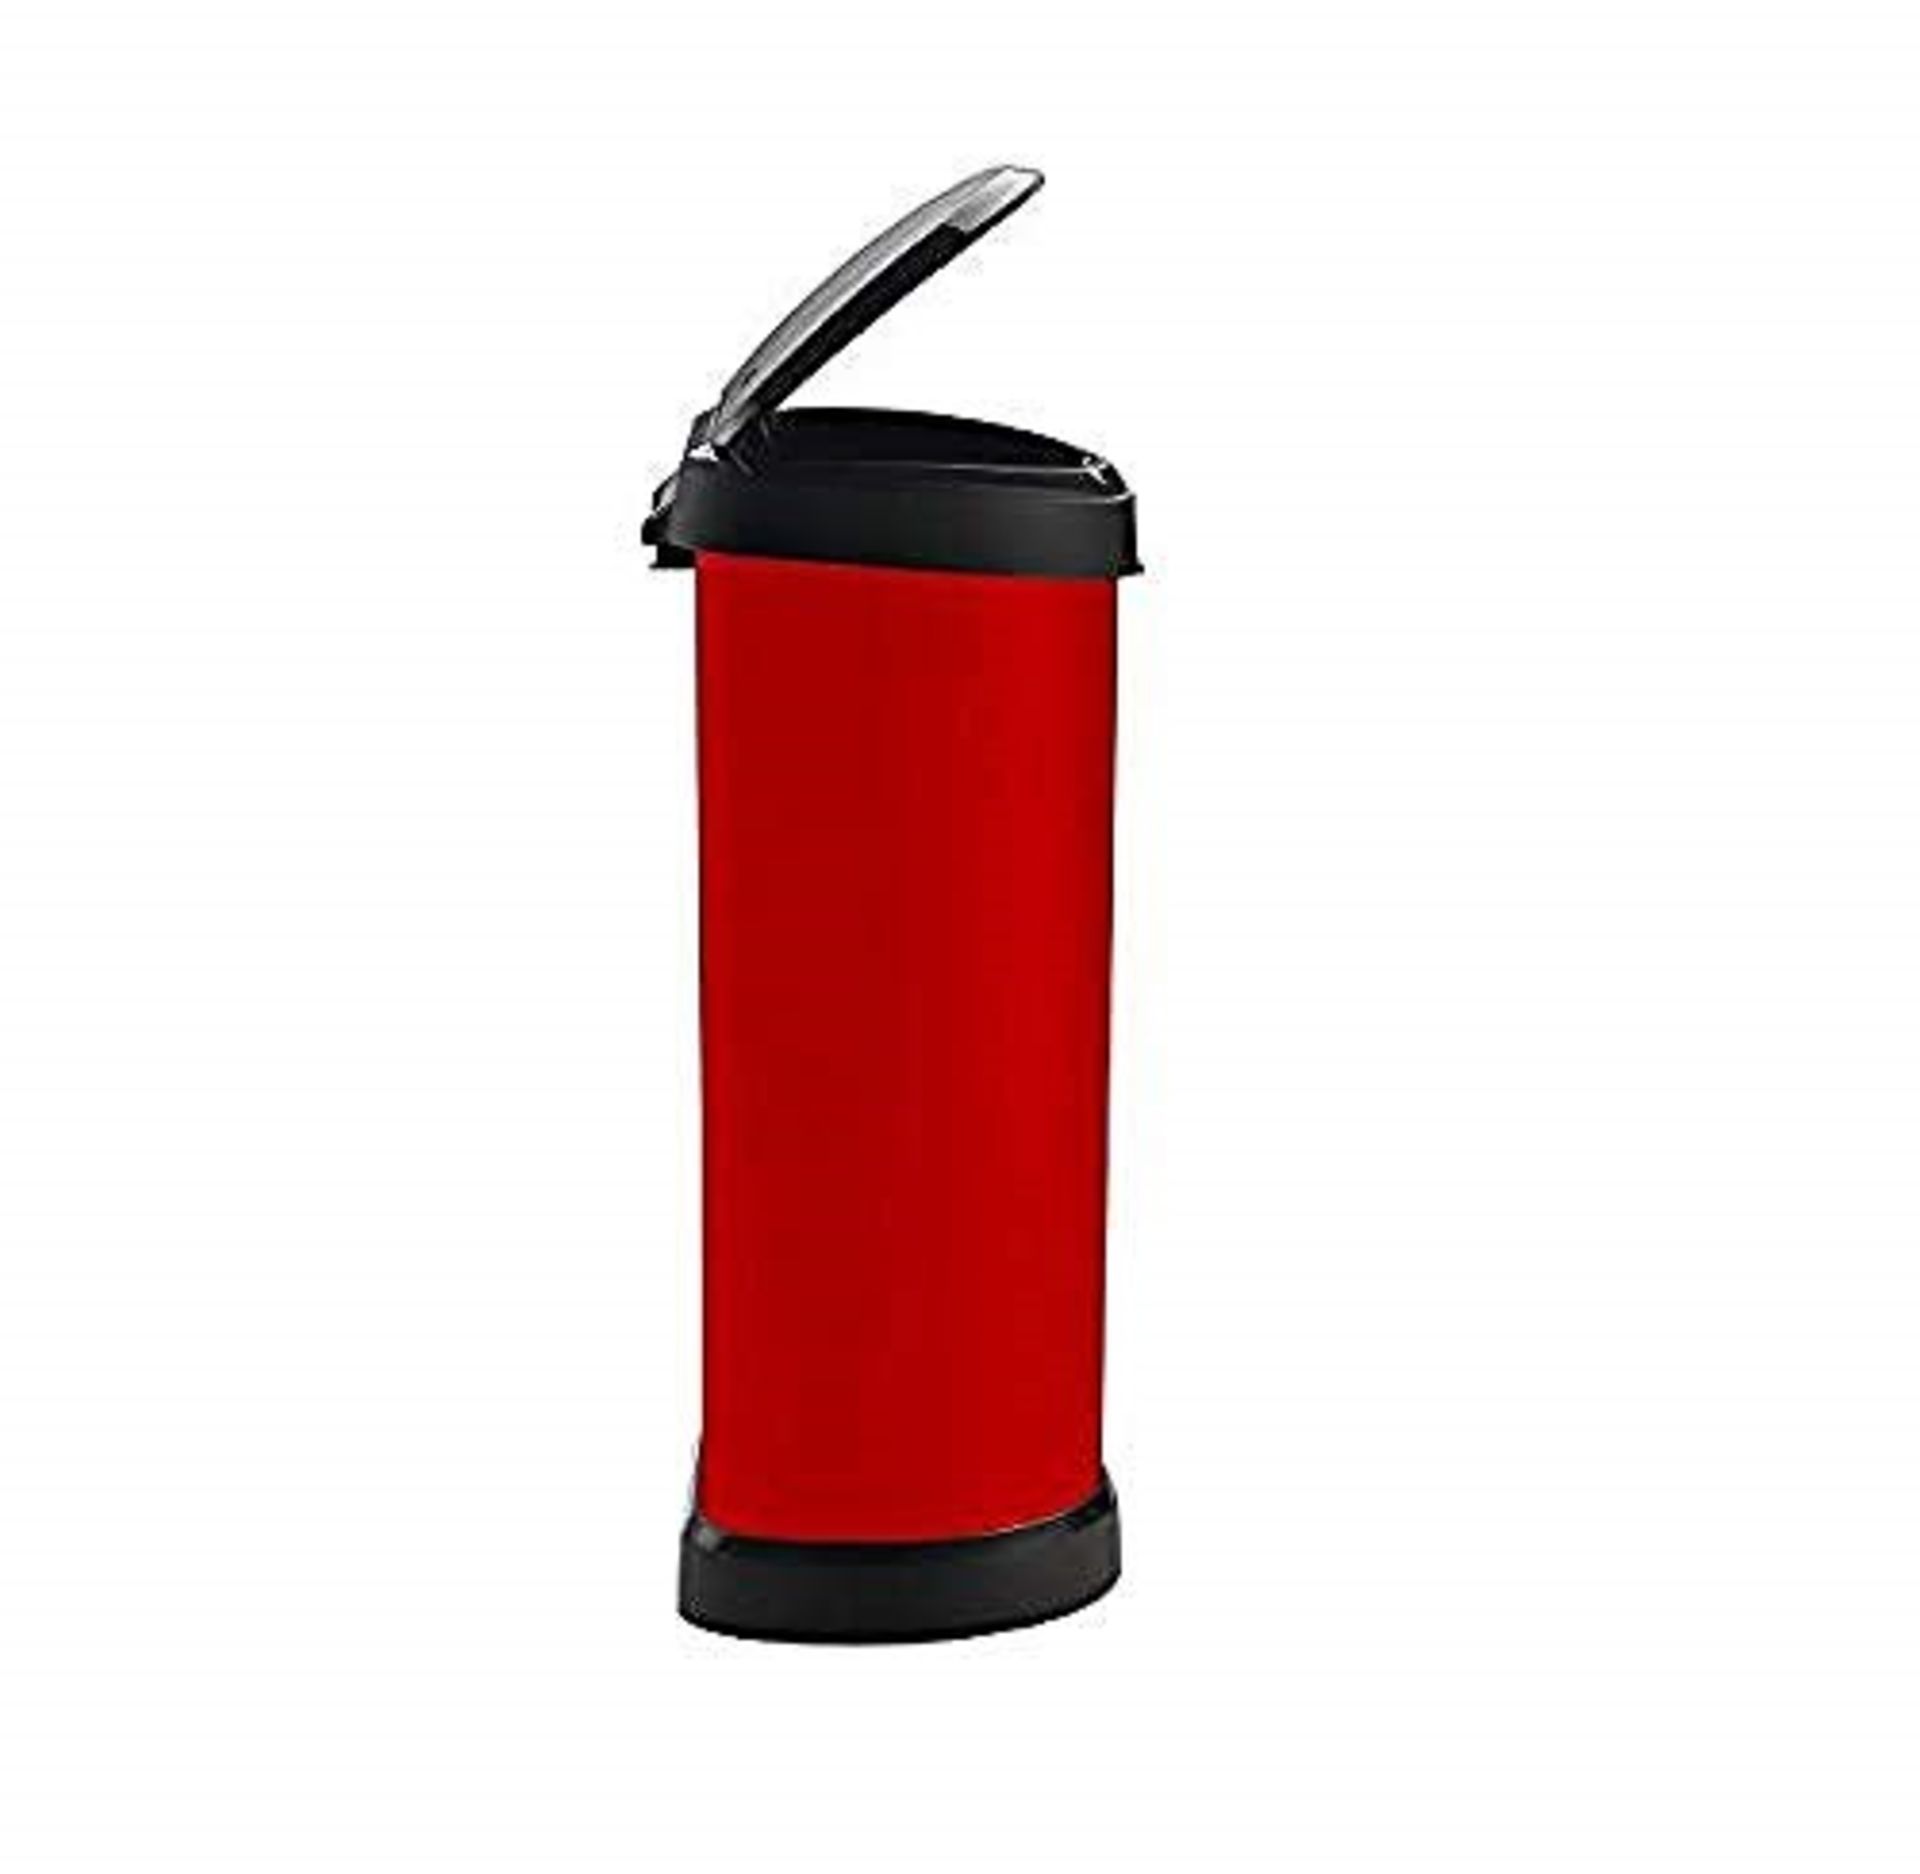 Curver Metal Effect Plastic One Touch Deco Bin, Red, 40 Litre